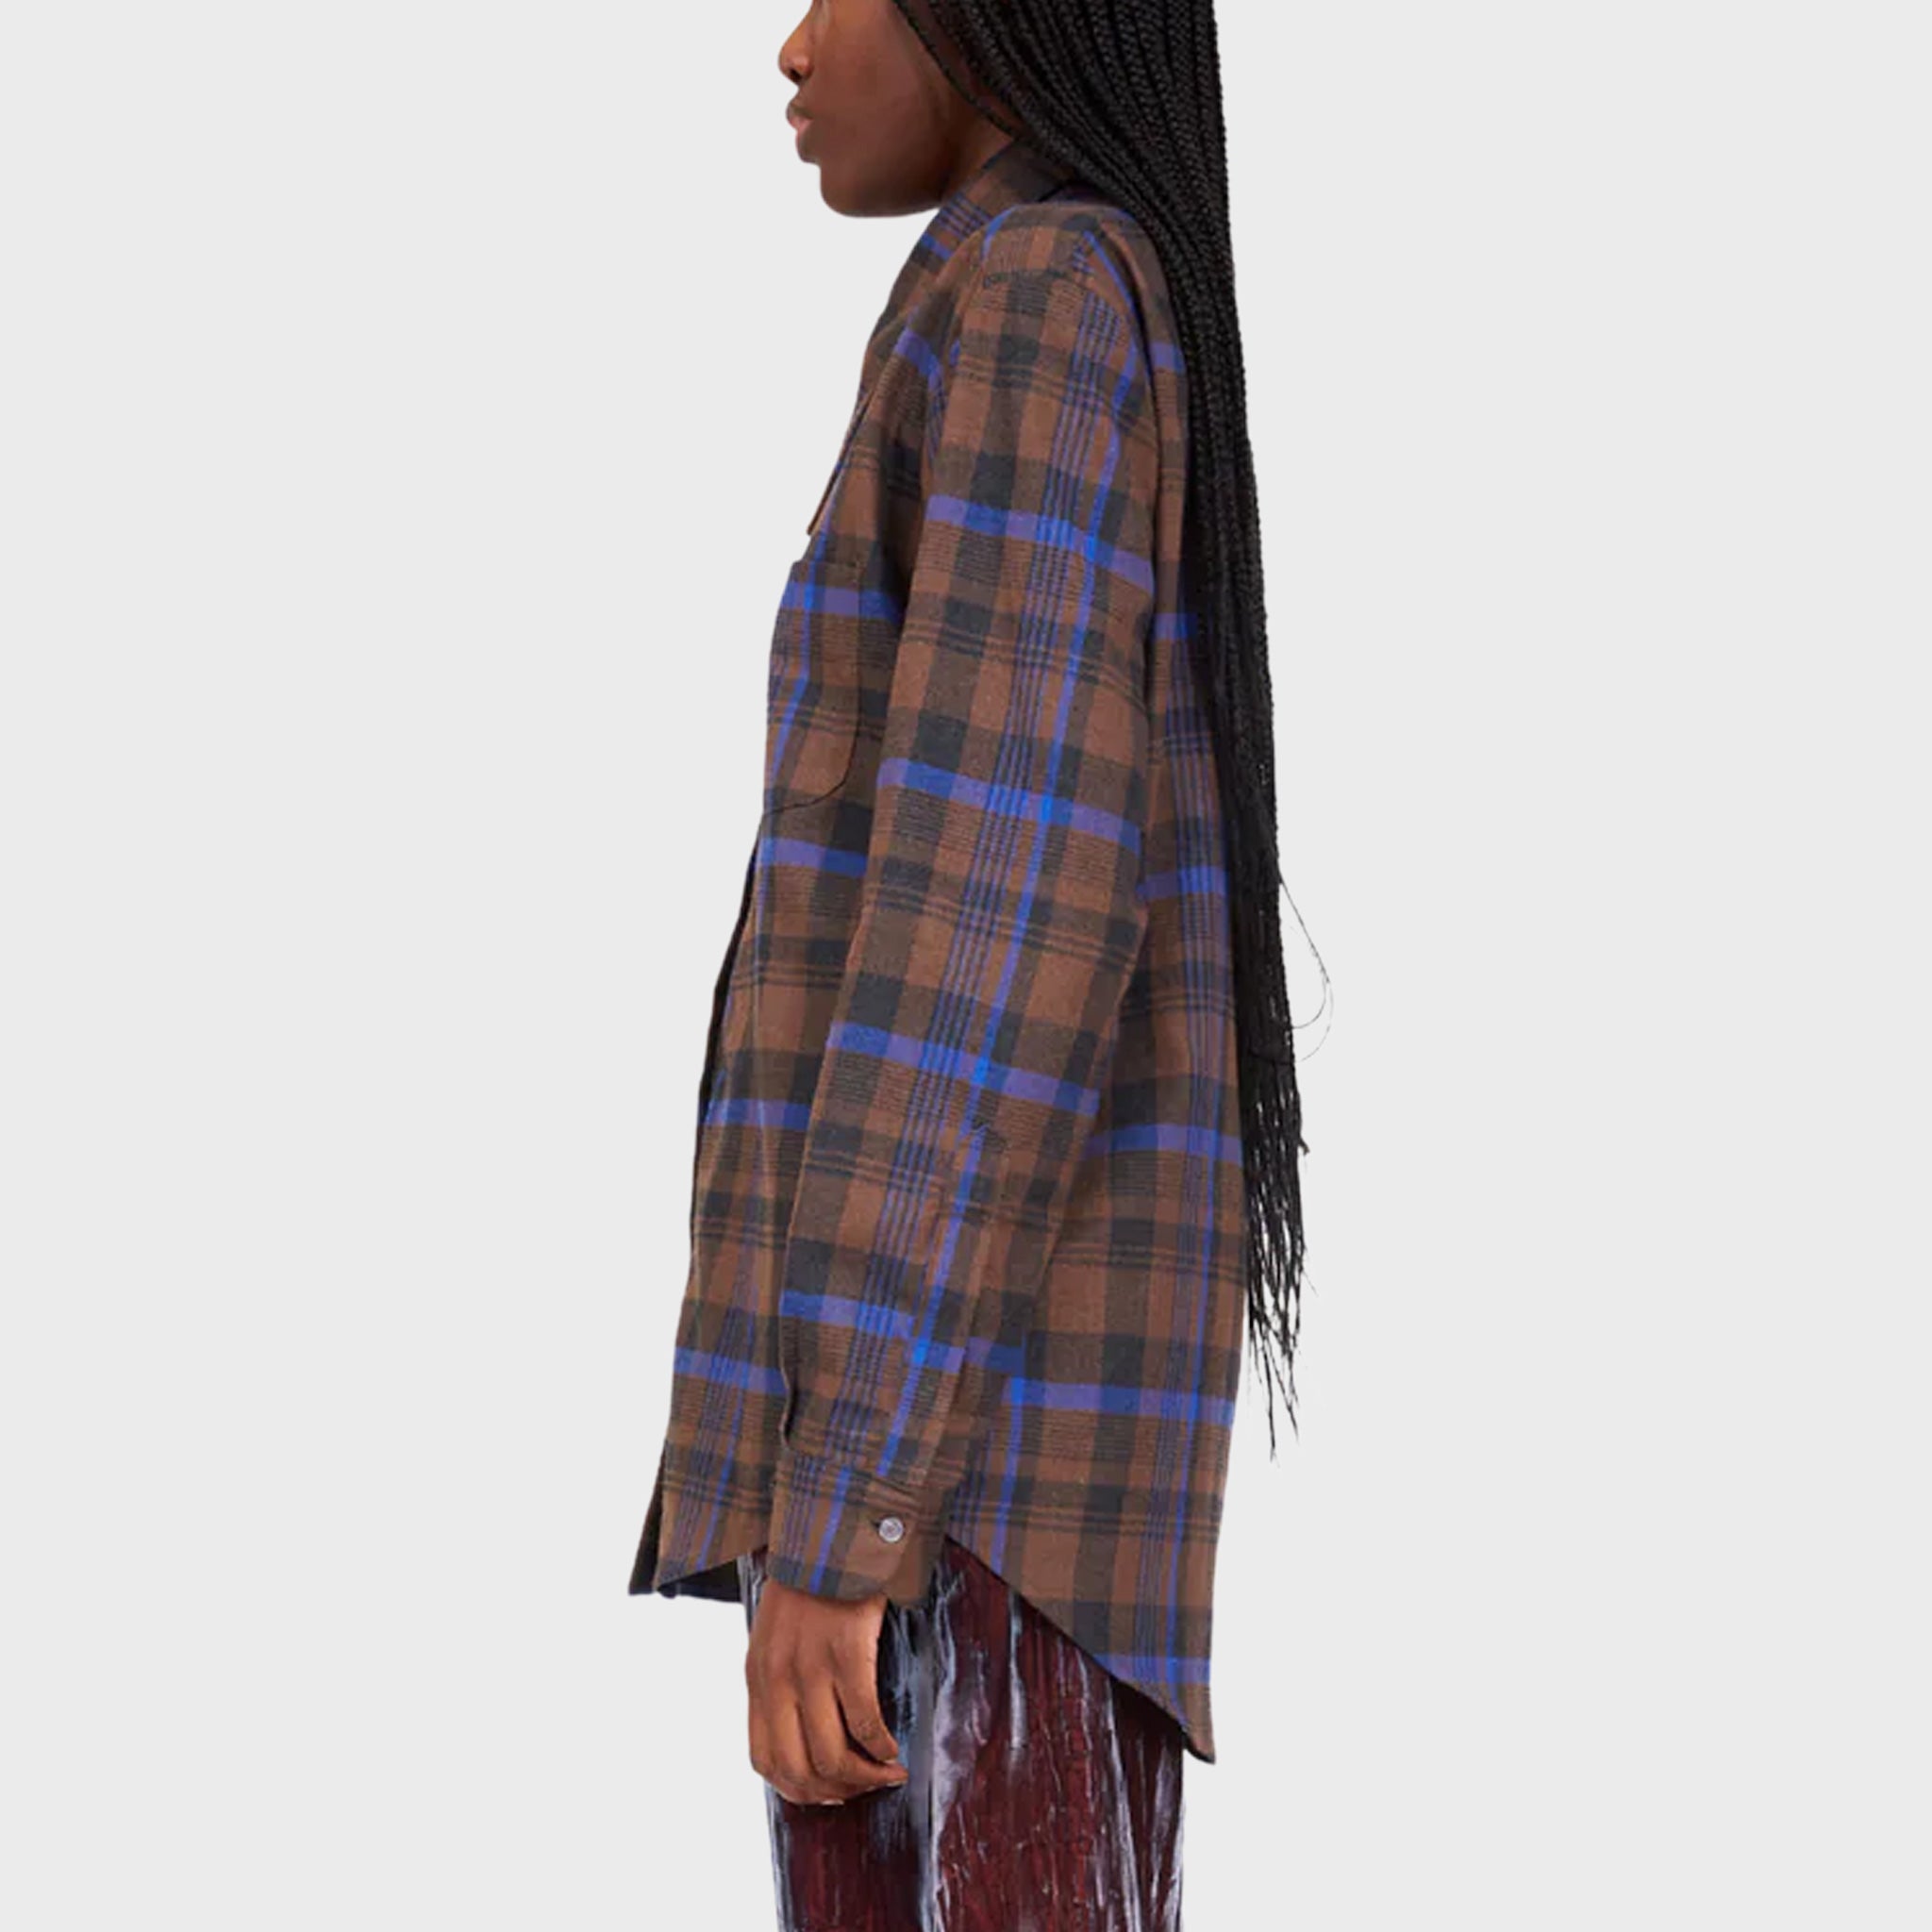 A model wears a brown and blue plaid flannel cotton shirt with an elongated collar that drops down like soft bunny ears - side view.